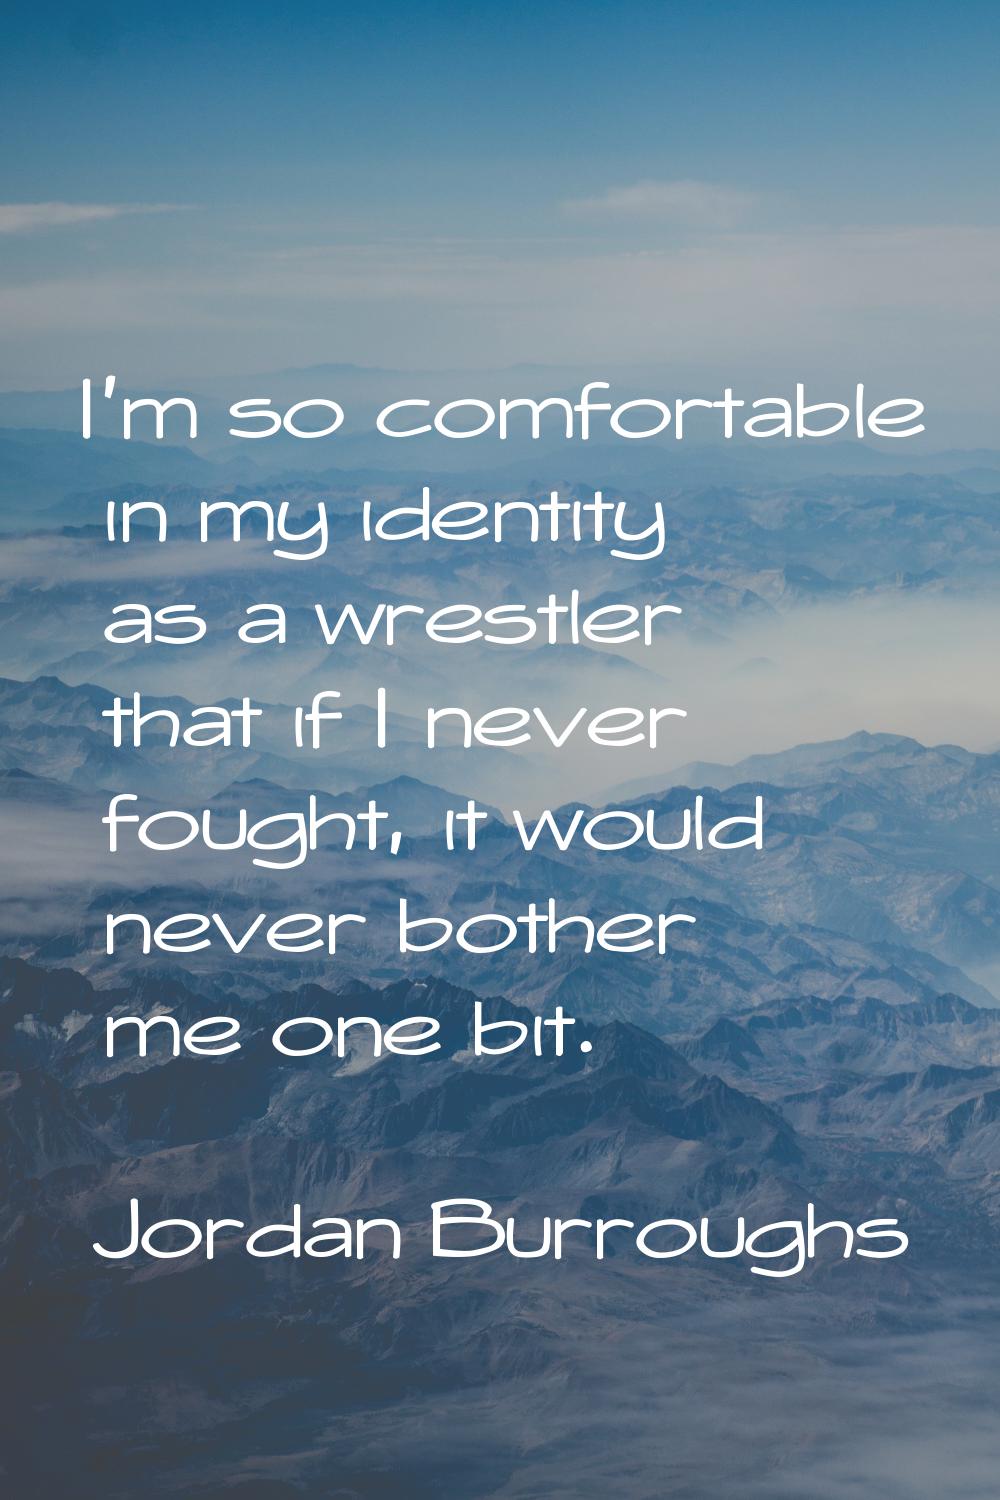 I'm so comfortable in my identity as a wrestler that if I never fought, it would never bother me on